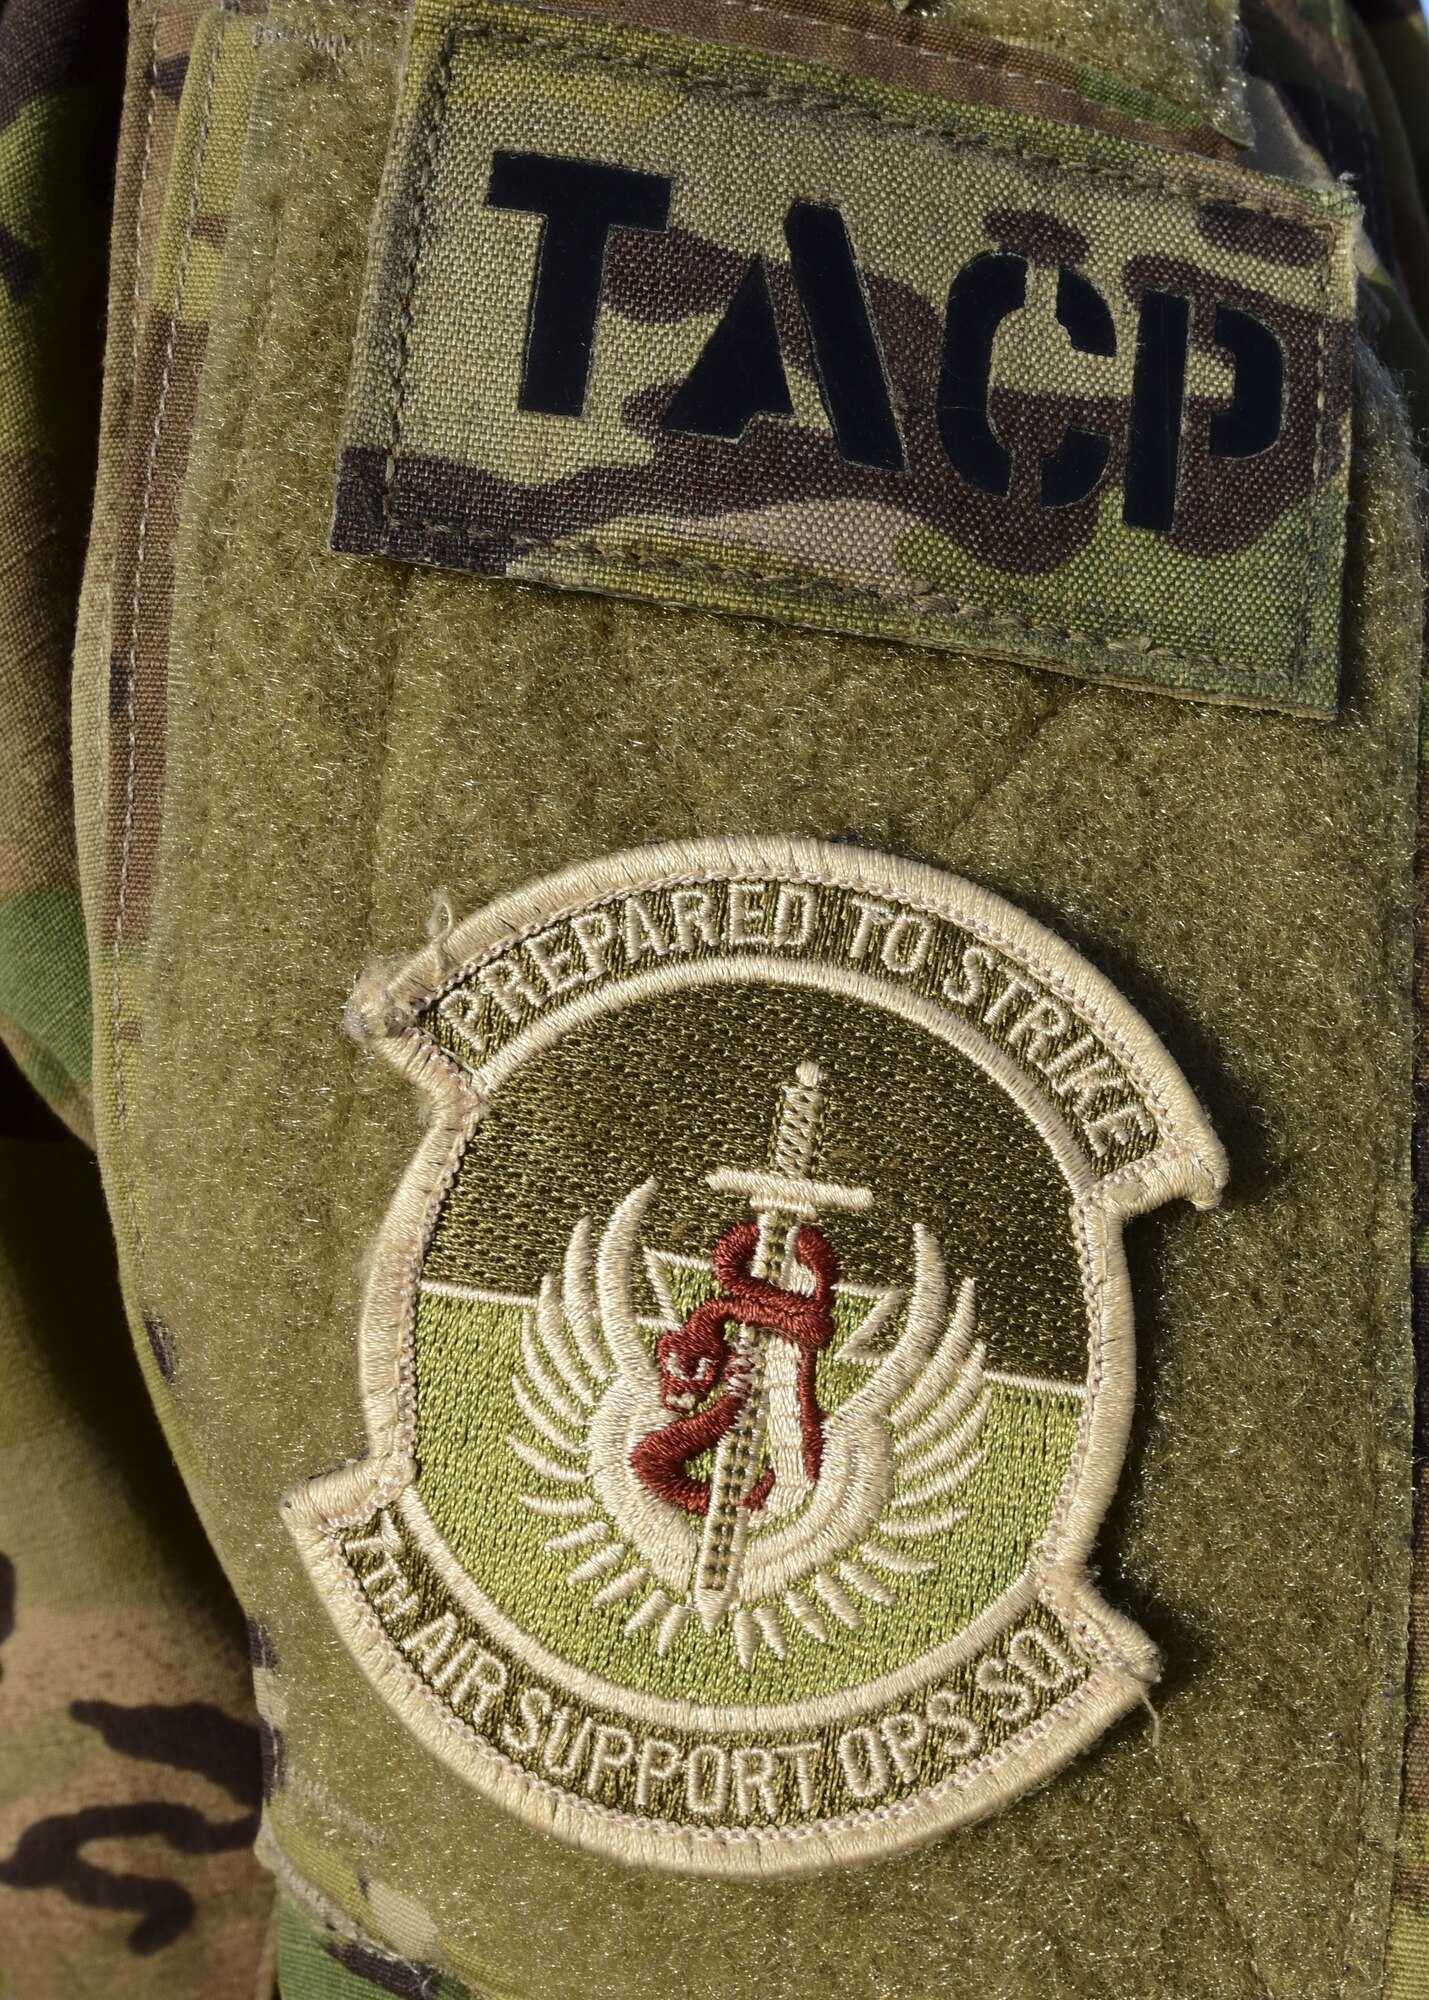 Tactical Air Control Party and 7th Air Support Operations Squadron patches on a Joint Terminal Attack Controller's Army Combat Uniform during joint training at Whiteman Air Force Base, Mo., Jan. 31, 2018. JTACs participated in a joint training, titled Truman Relief, with the 509th Bomb Wing and 1-135th Assault Helicopter Battalion at Whiteman Air Force Base, Mo., Jan. 29 - Feb. 2, 2018. (U.S. Air Force by Staff Sgt. Danielle Quilla)